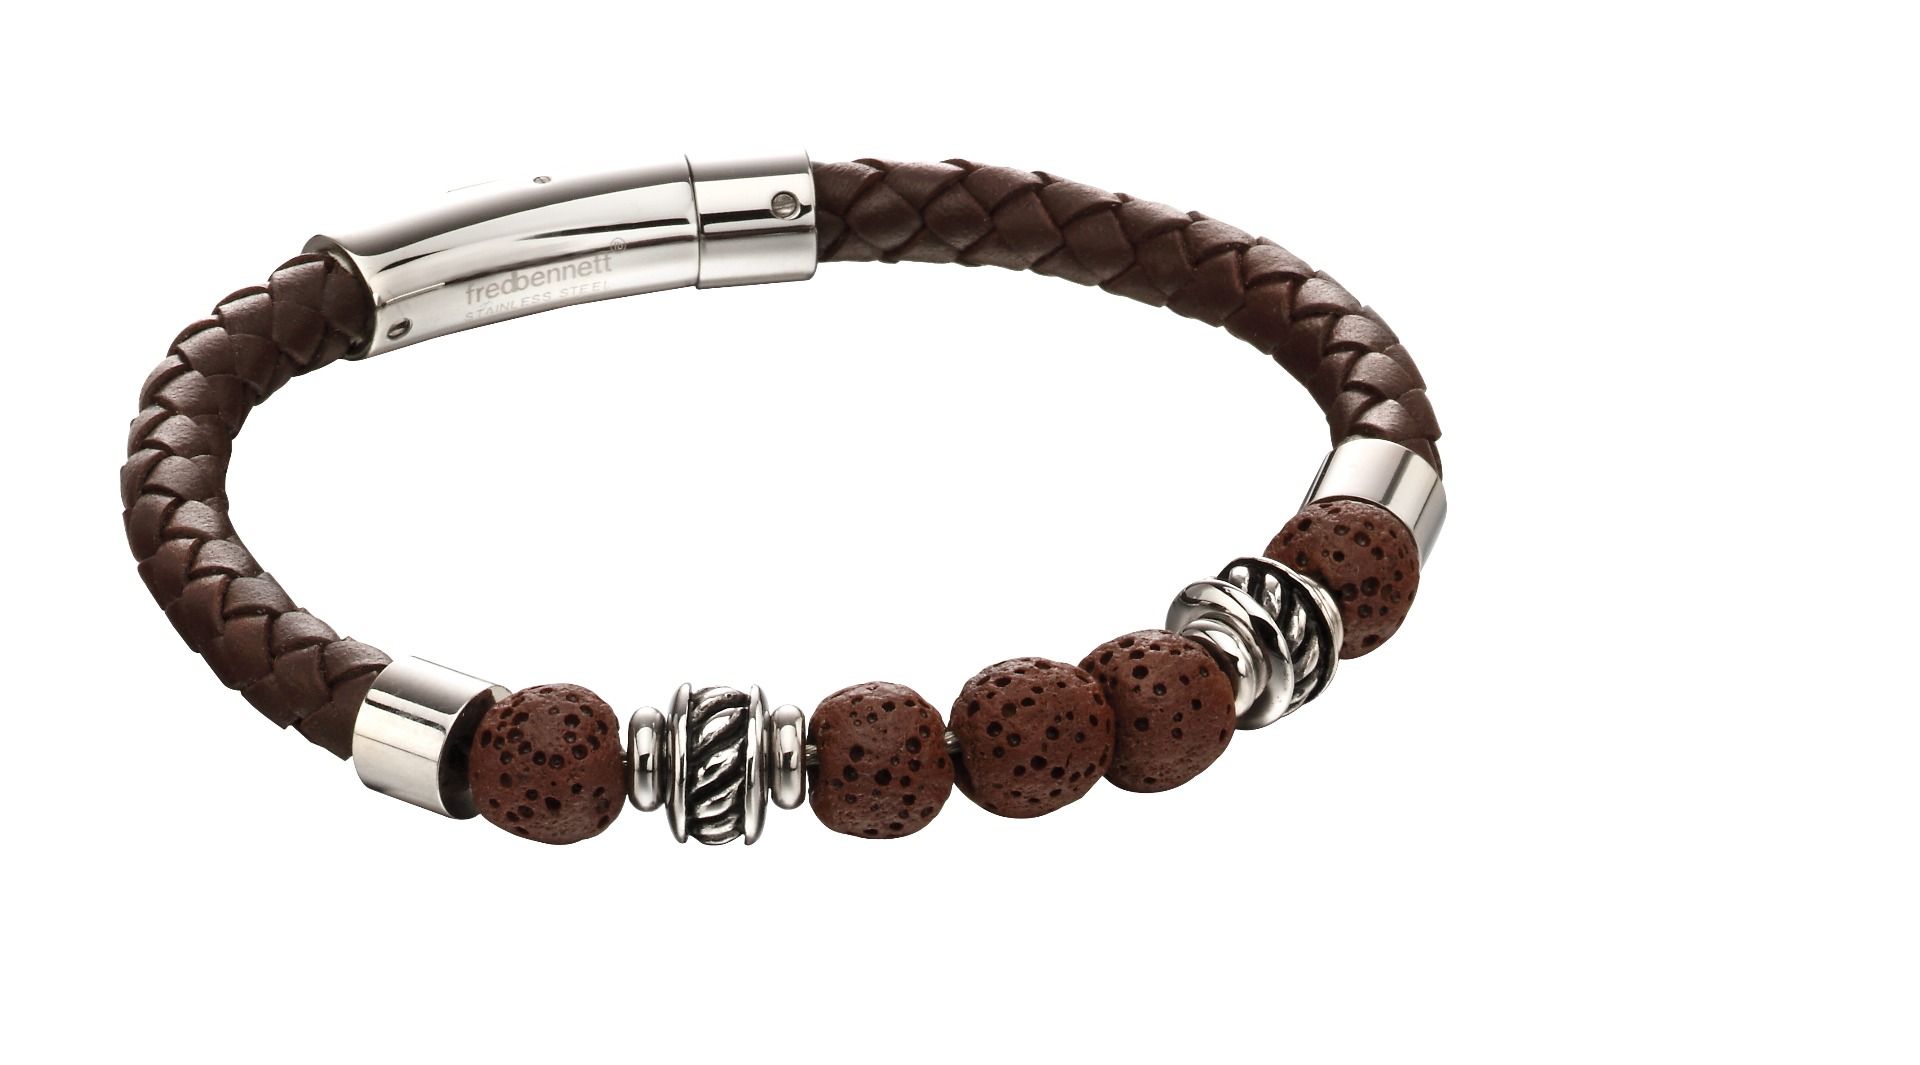 Contemporary half leather half bead design braceletContemporary half leather half bead design bracelet21.5cm lengthFeatures 5 synthetic lava stonesBlack version availableComes Complete with Branded Packaging